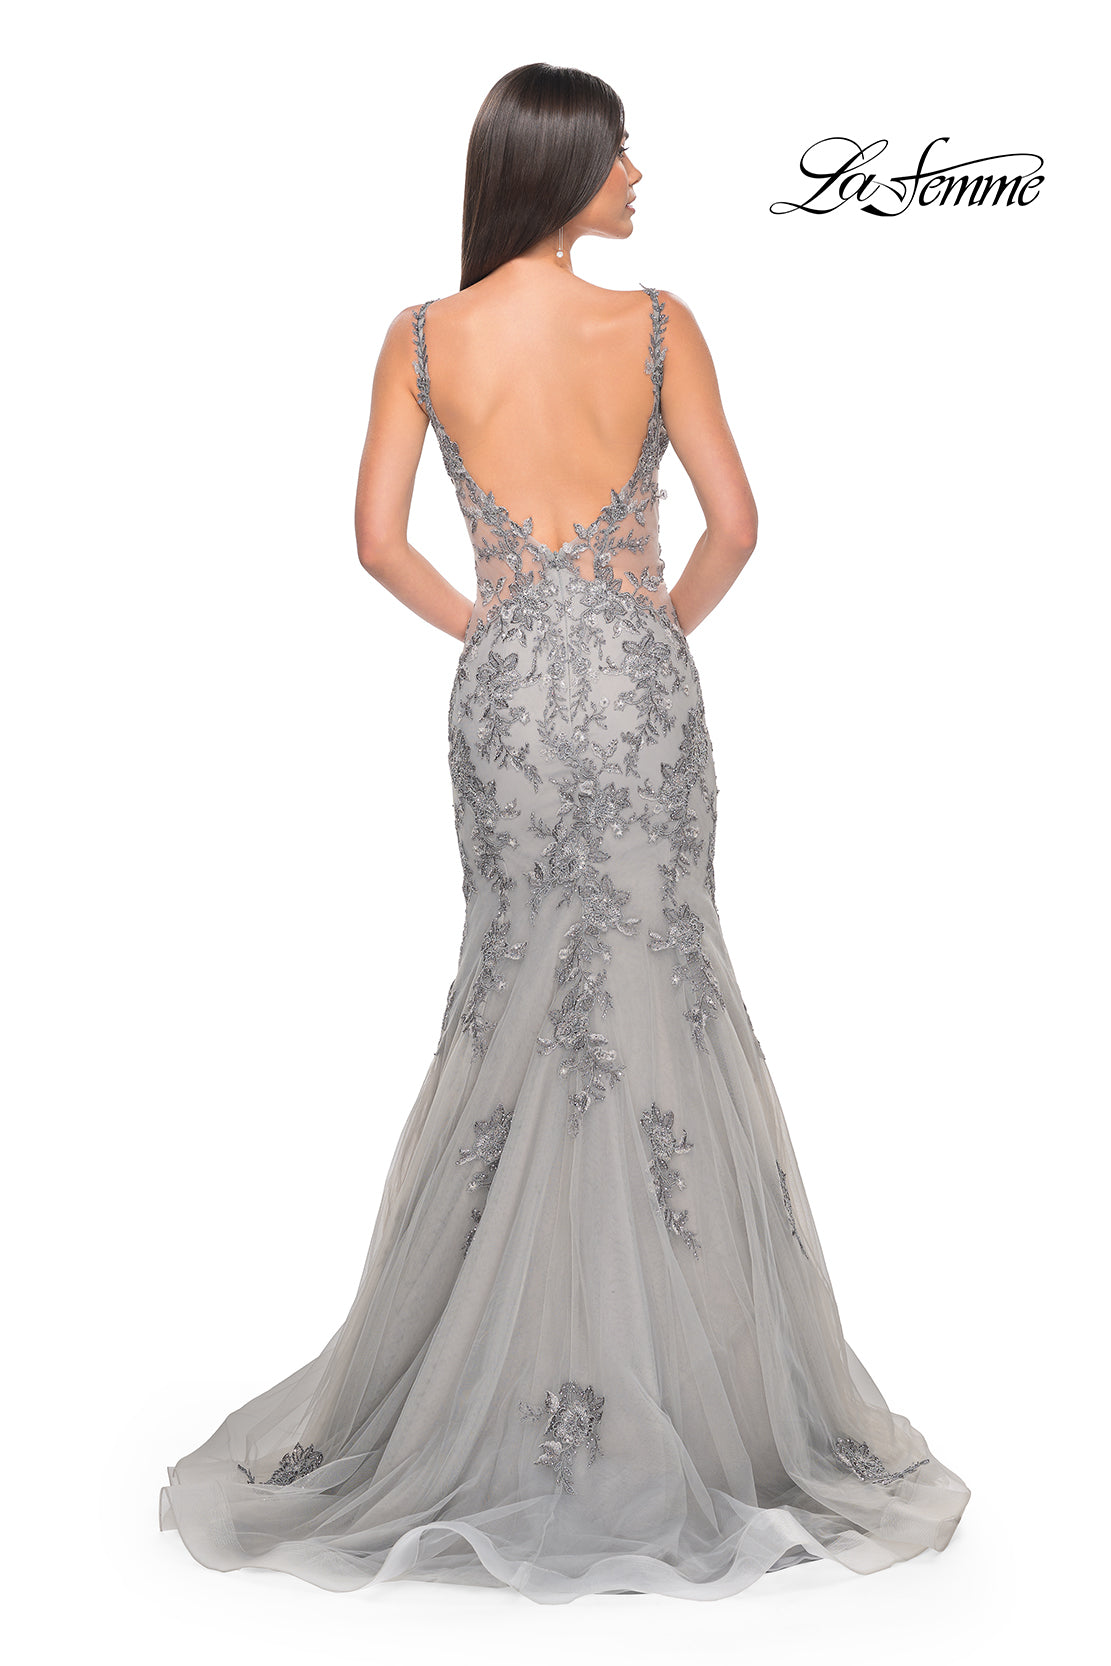 La Femme 32295 - An enchanting mermaid gown with lace applique and illusion mesh sides, perfect for a classic yet modern look at prom or evening events.